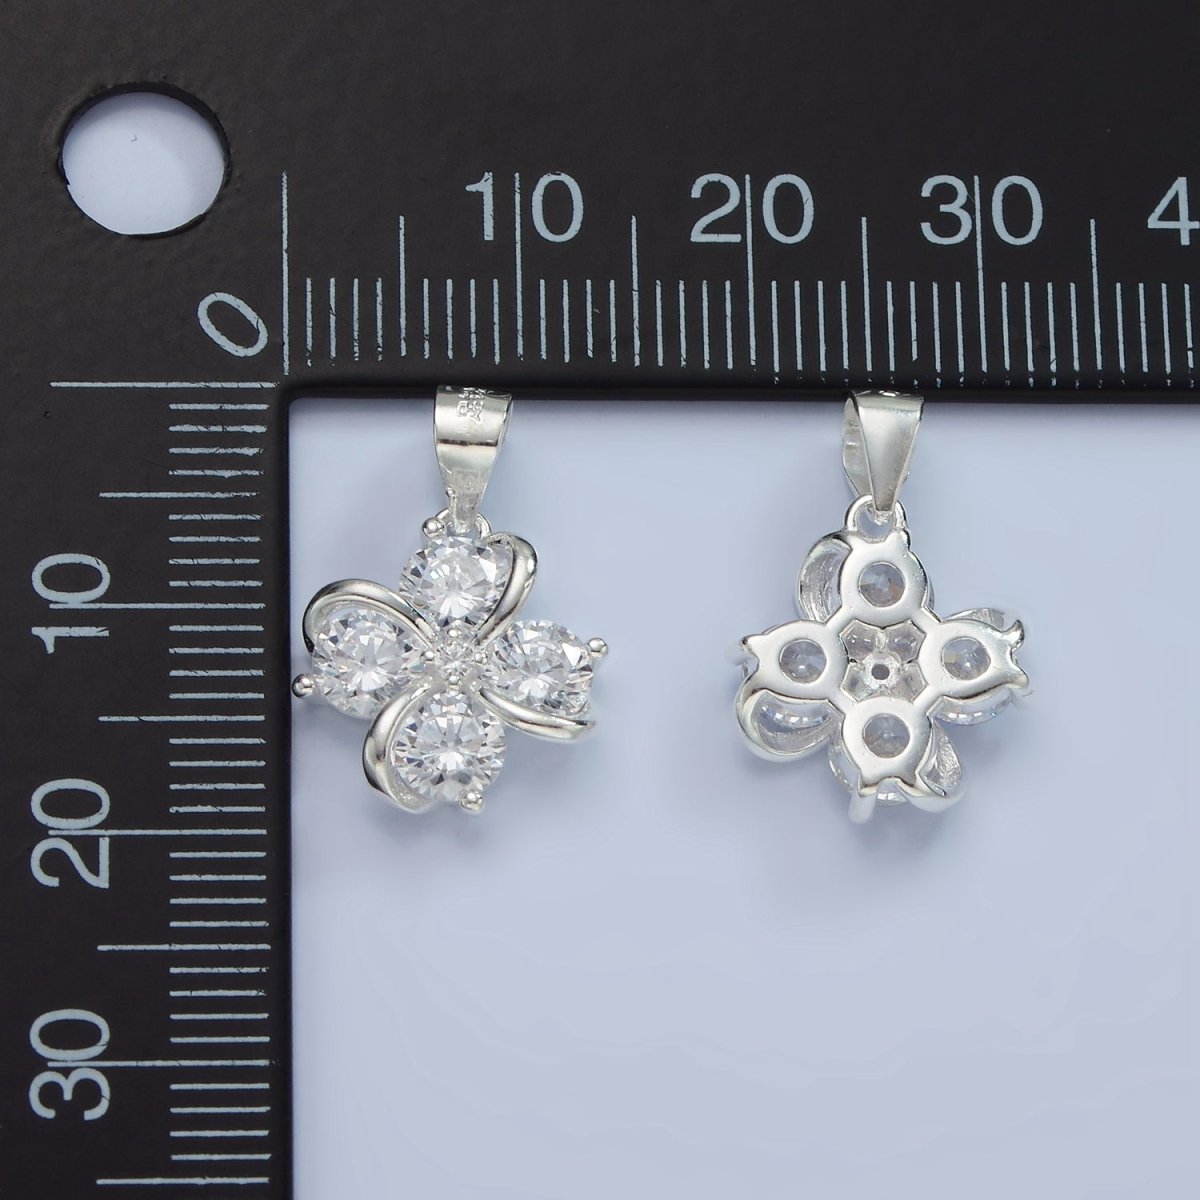 925 Sterling Silver Flower Charm Clear Cubic Zirconia Stone Floral Pendant SL-457 - DLUXCA